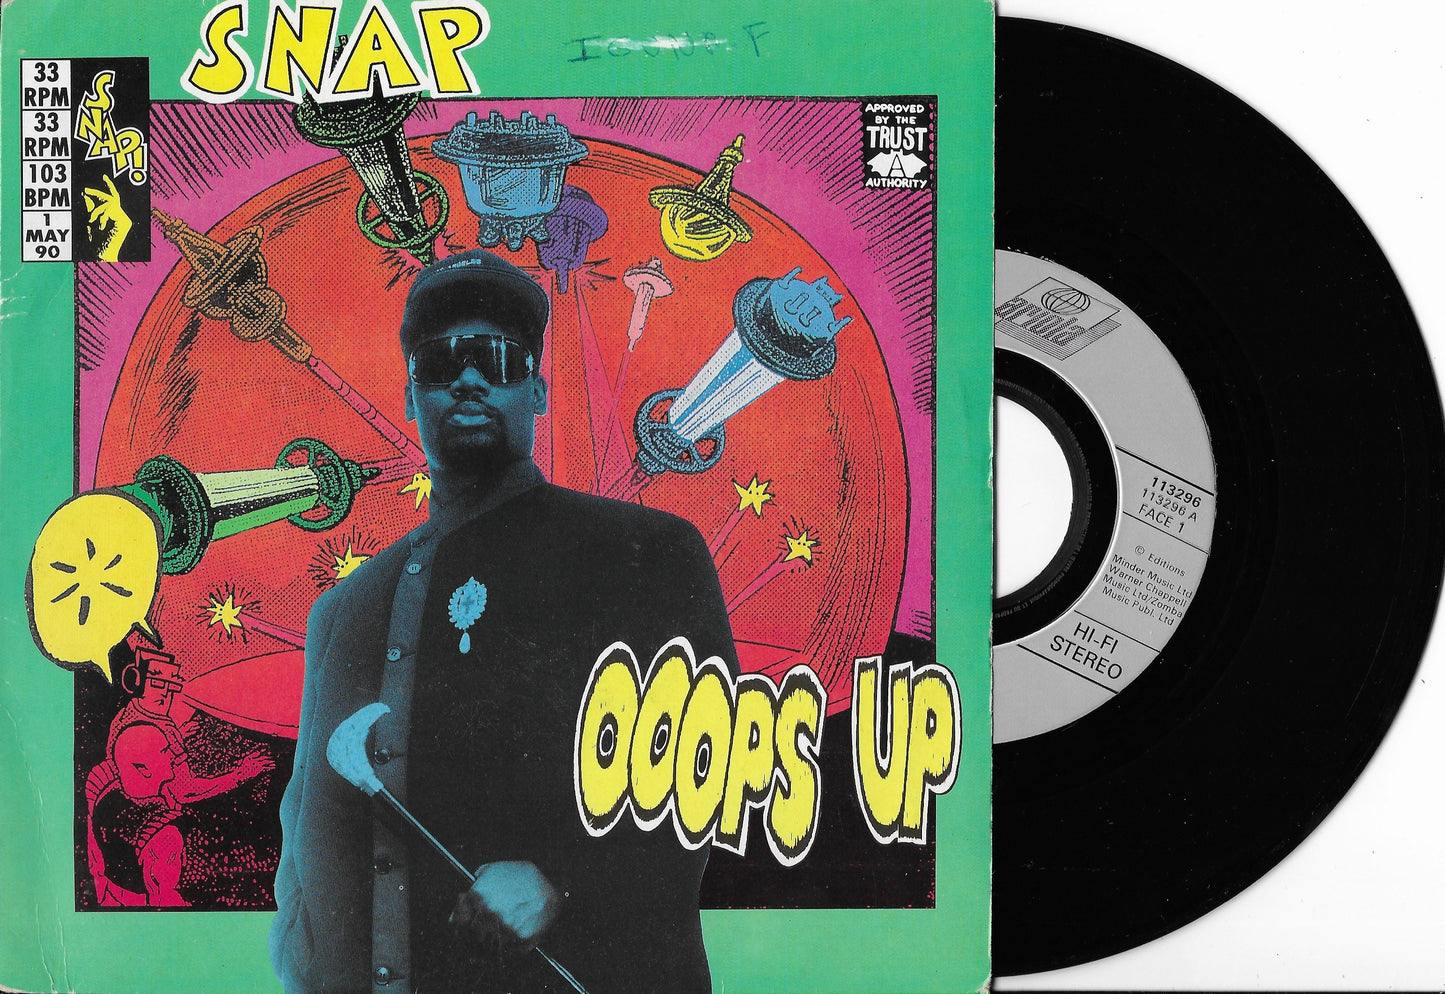 SNAP - Ooops Up